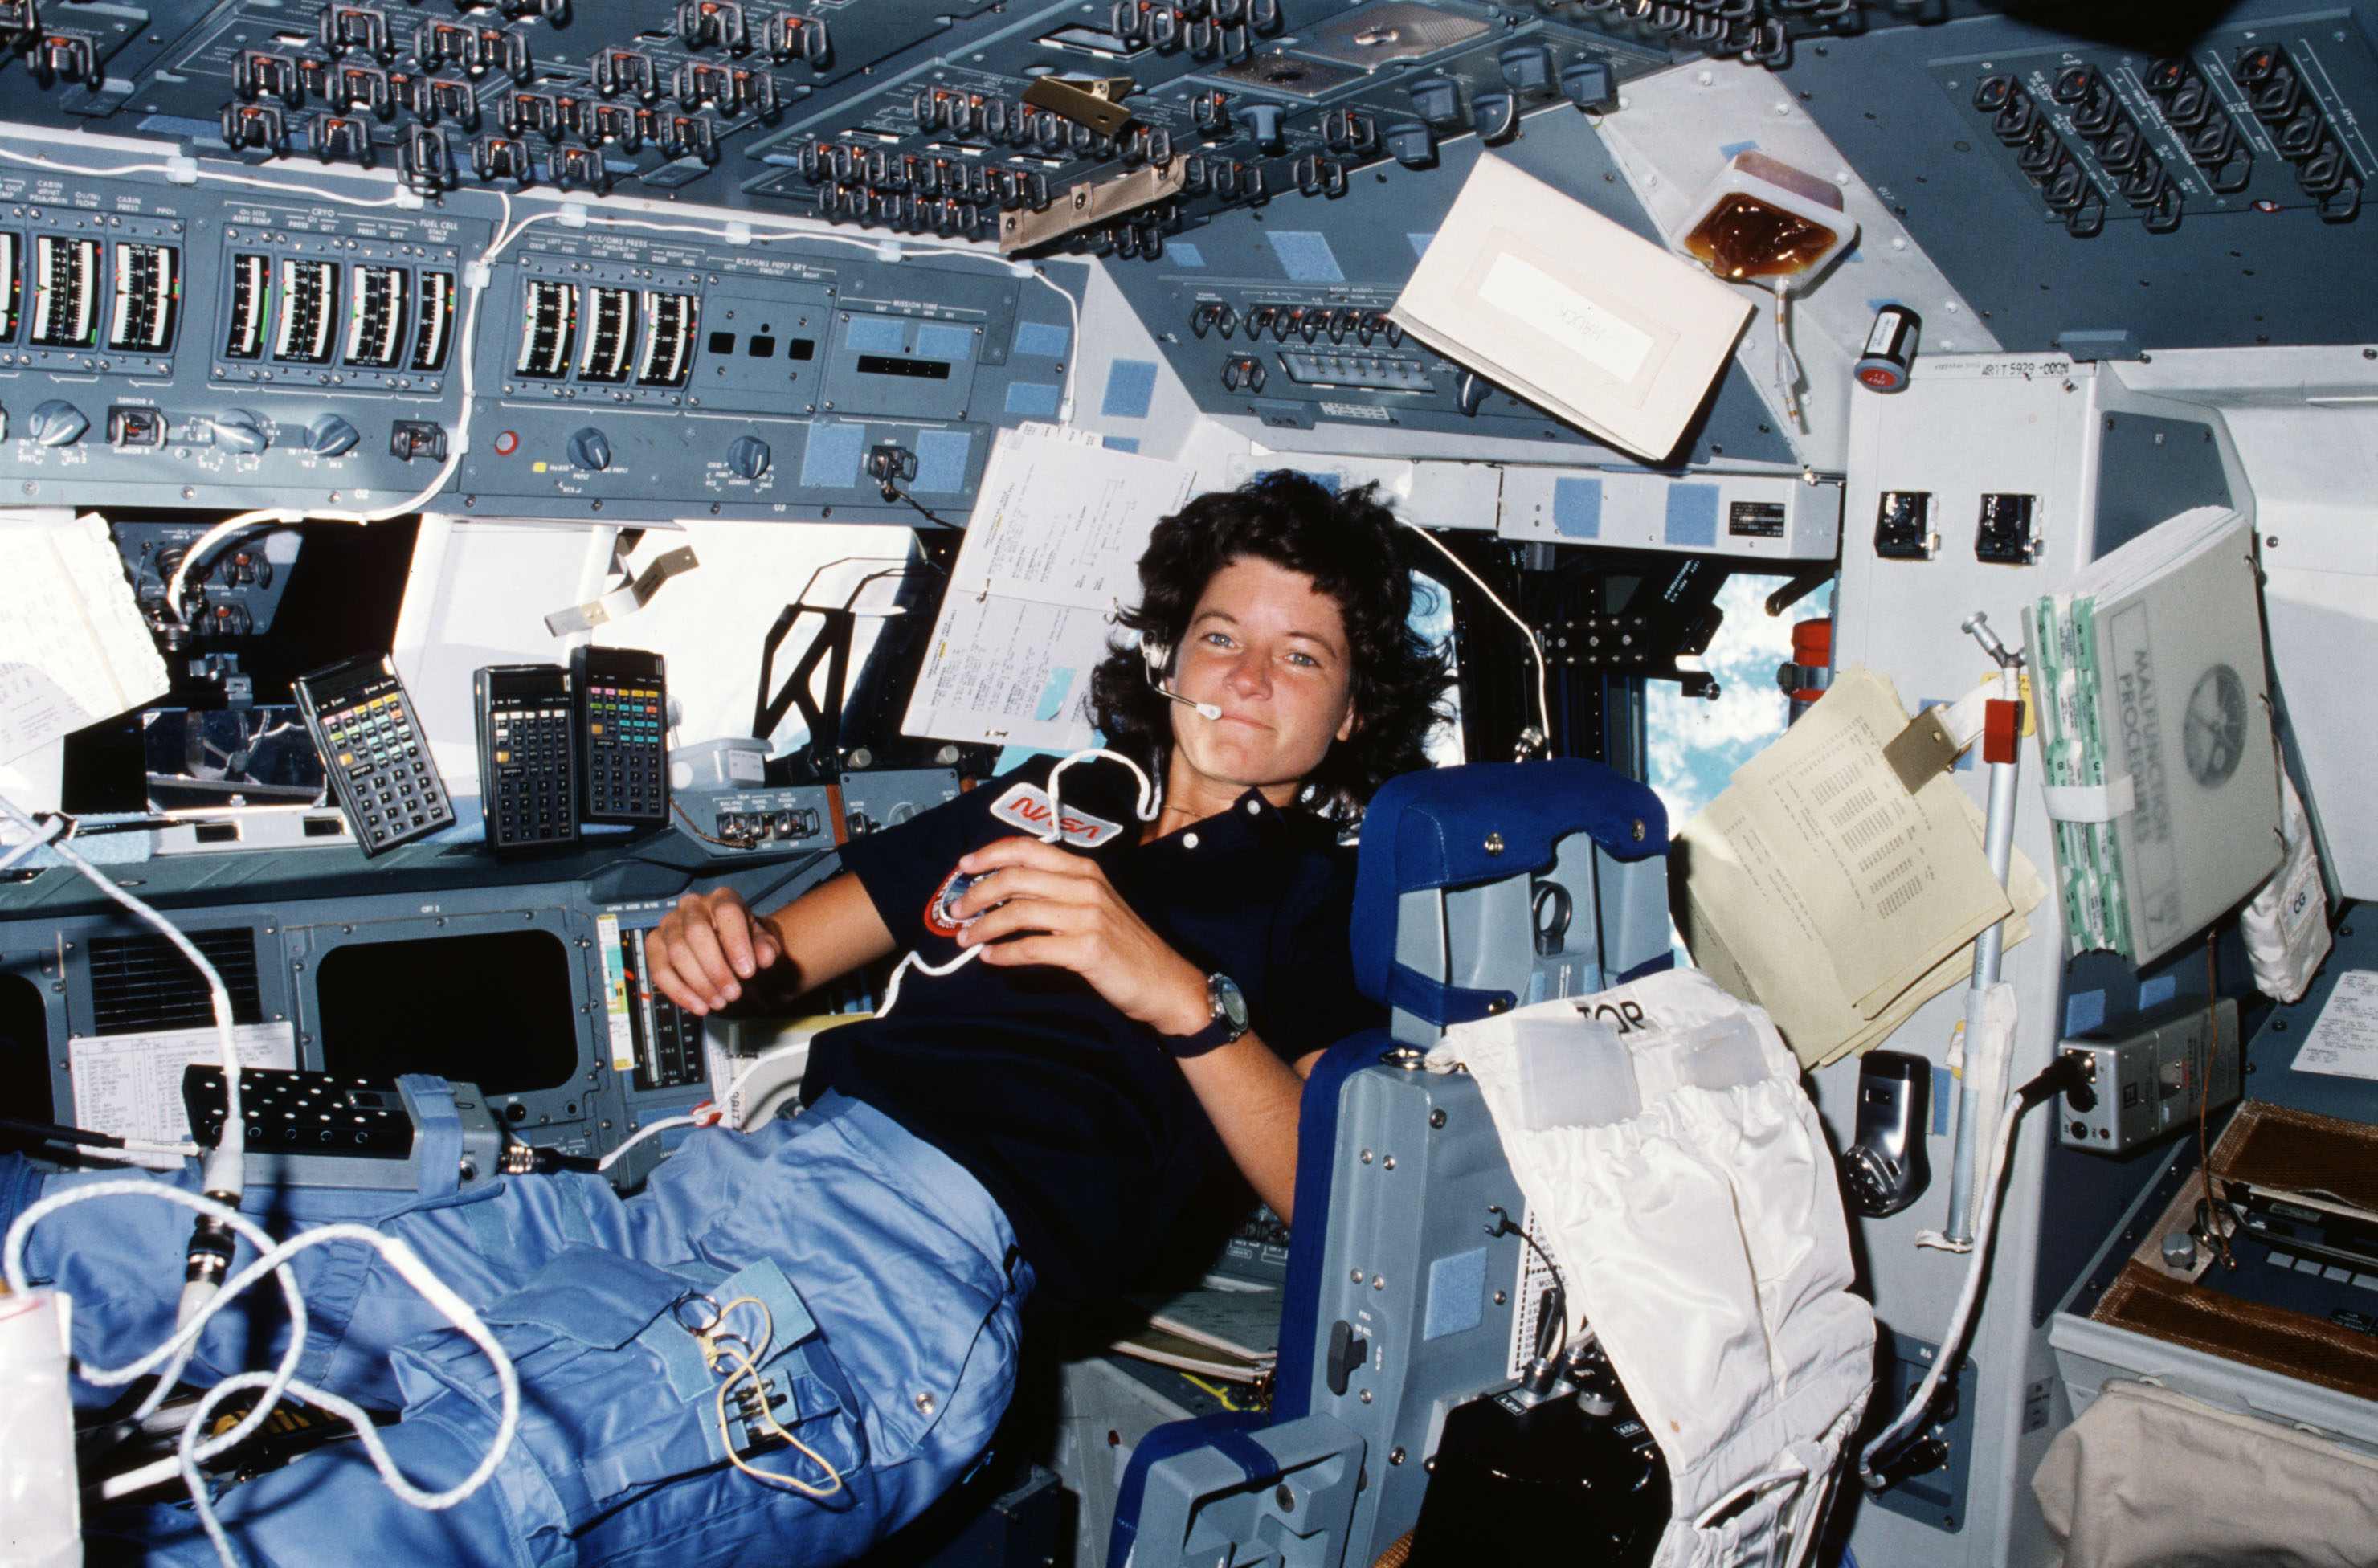 ride, sally ride: 35 years since america"s first